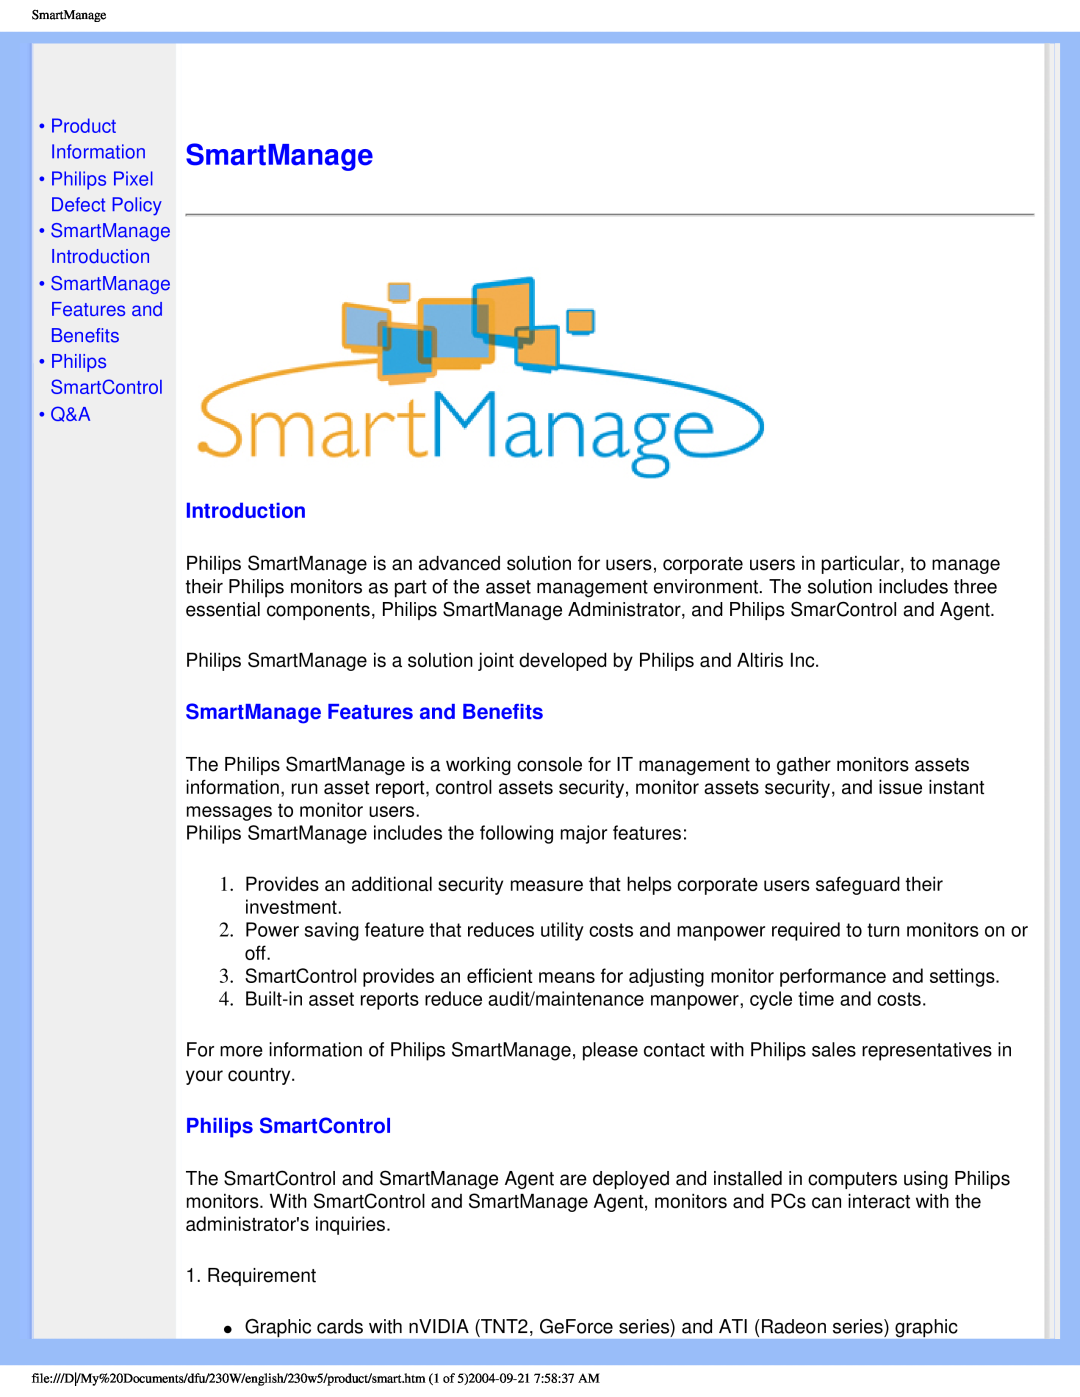 Philips 230w5 user manual SmartManage Features and Benefits, Philips SmartControl, SmartManage Introduction 